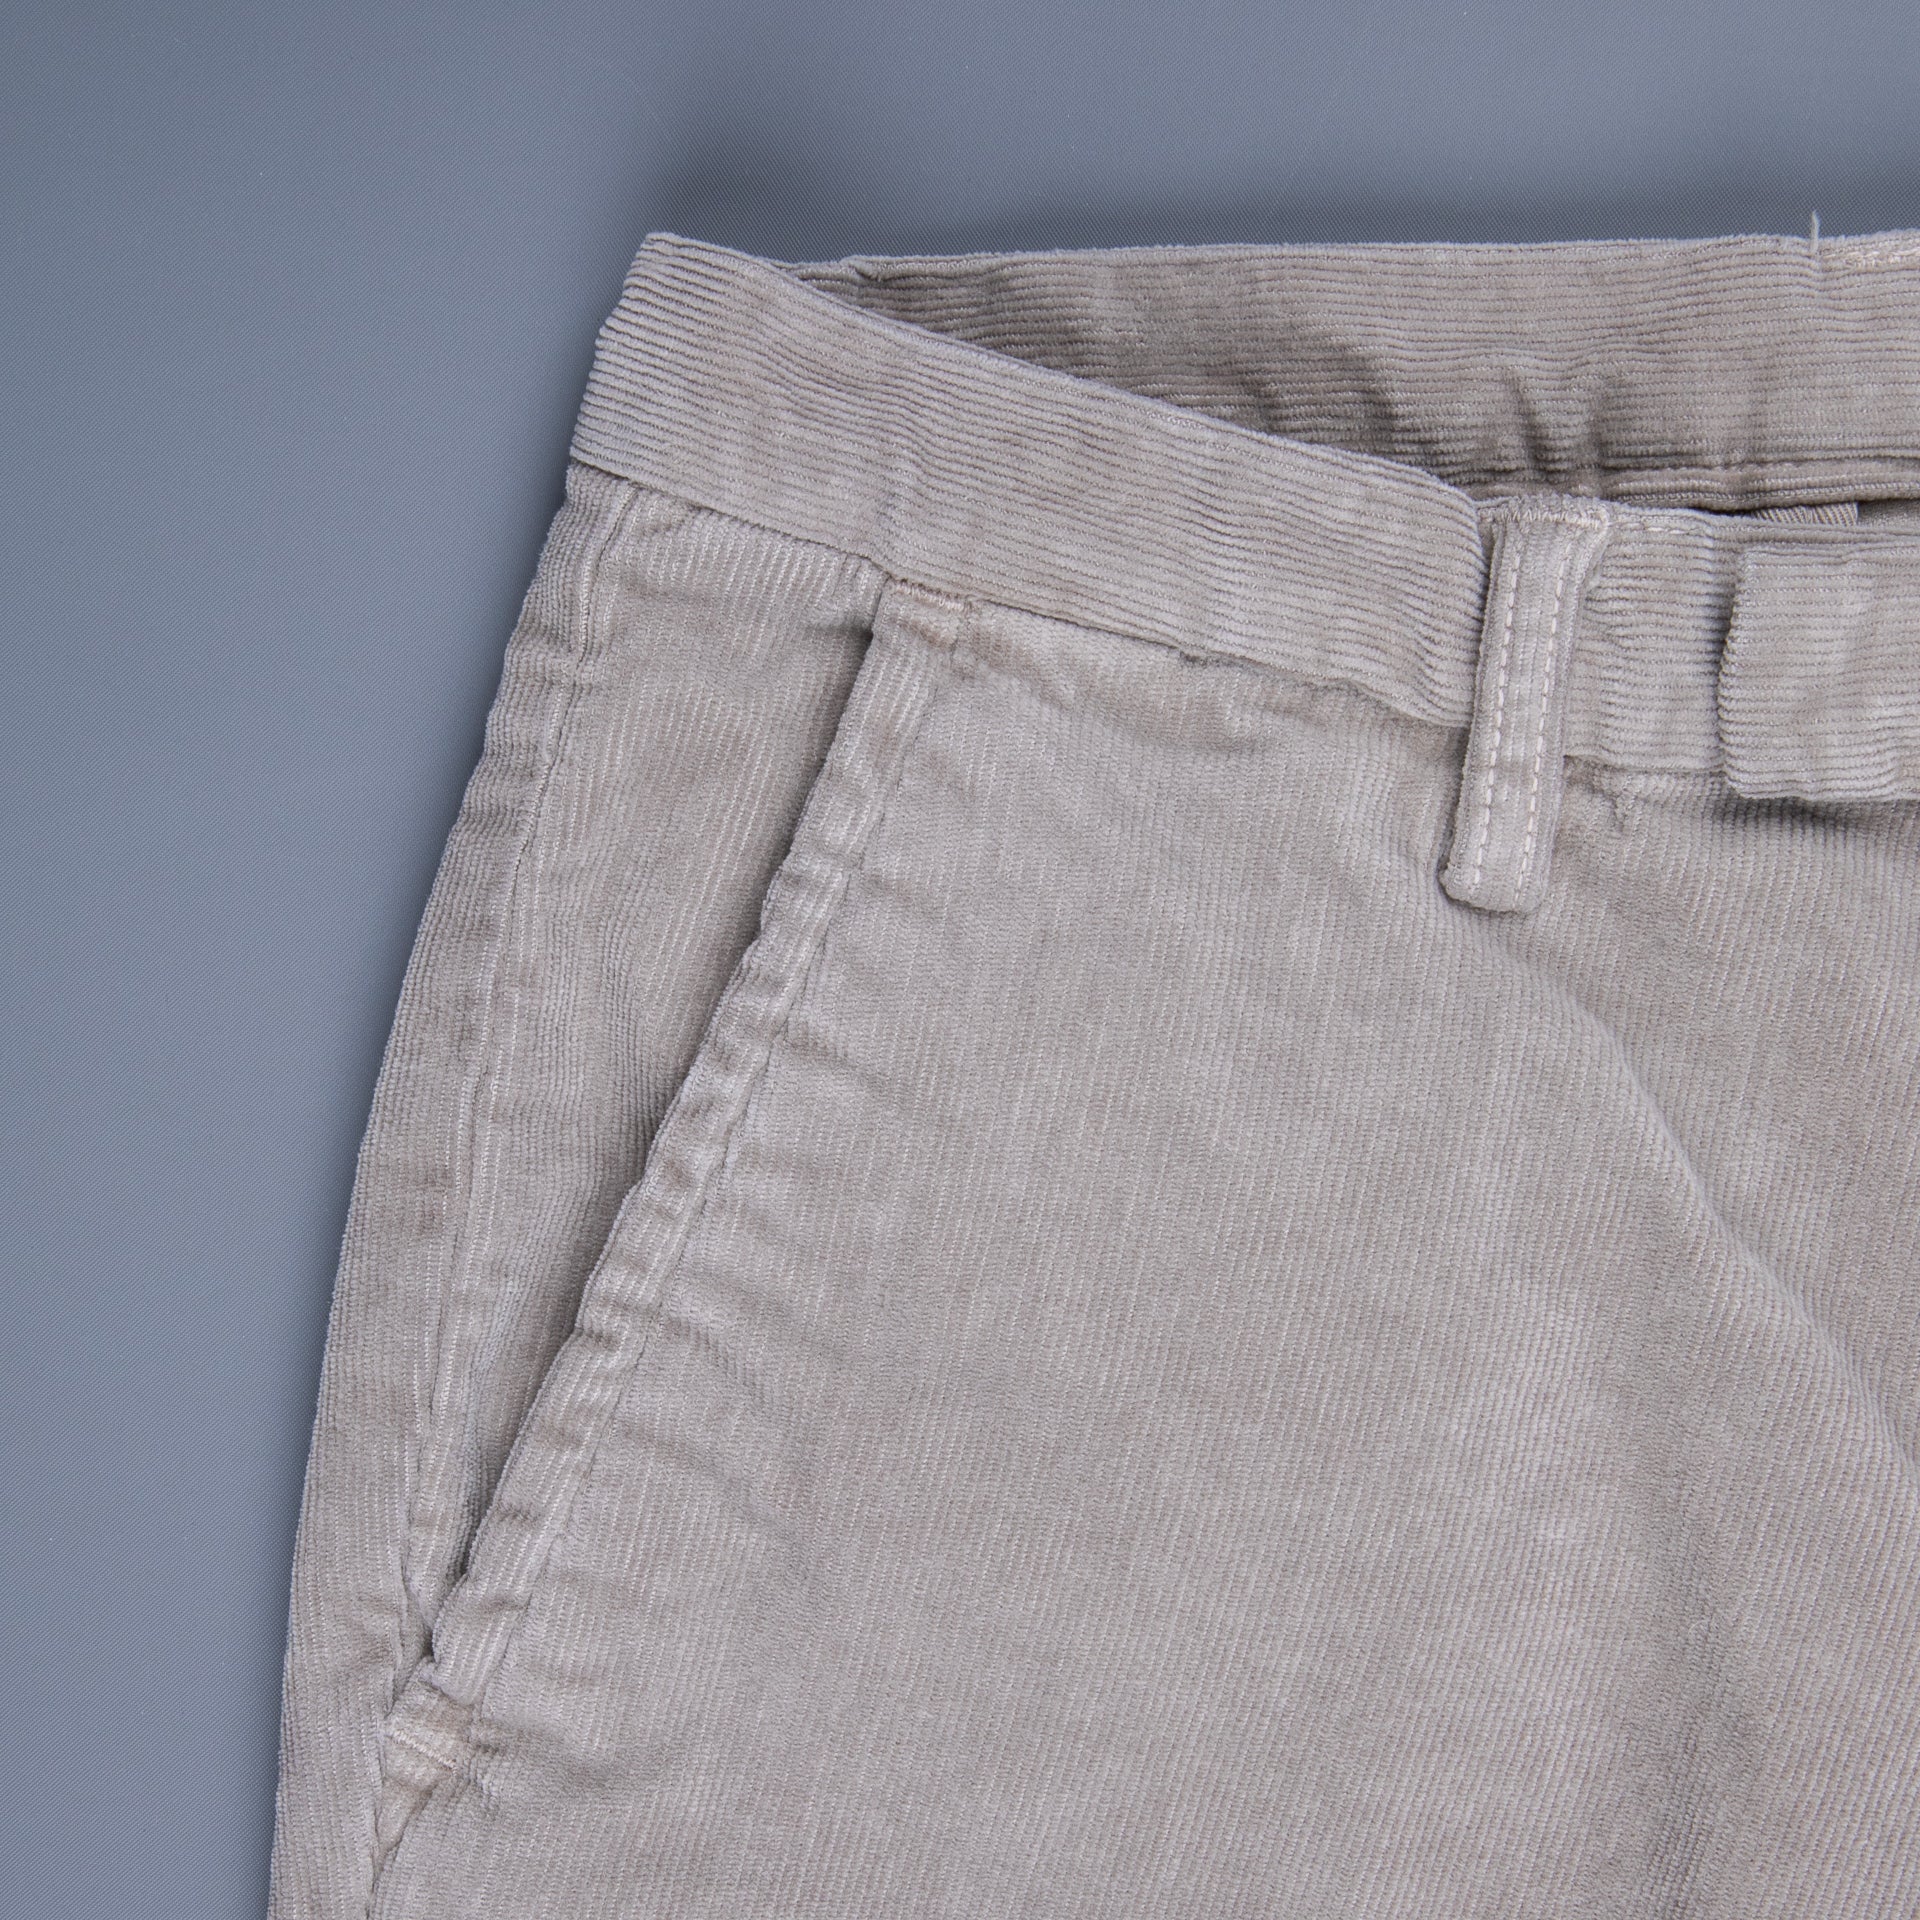 Remi Relief Corduroy stretch pants light gray – Frans Boone Store